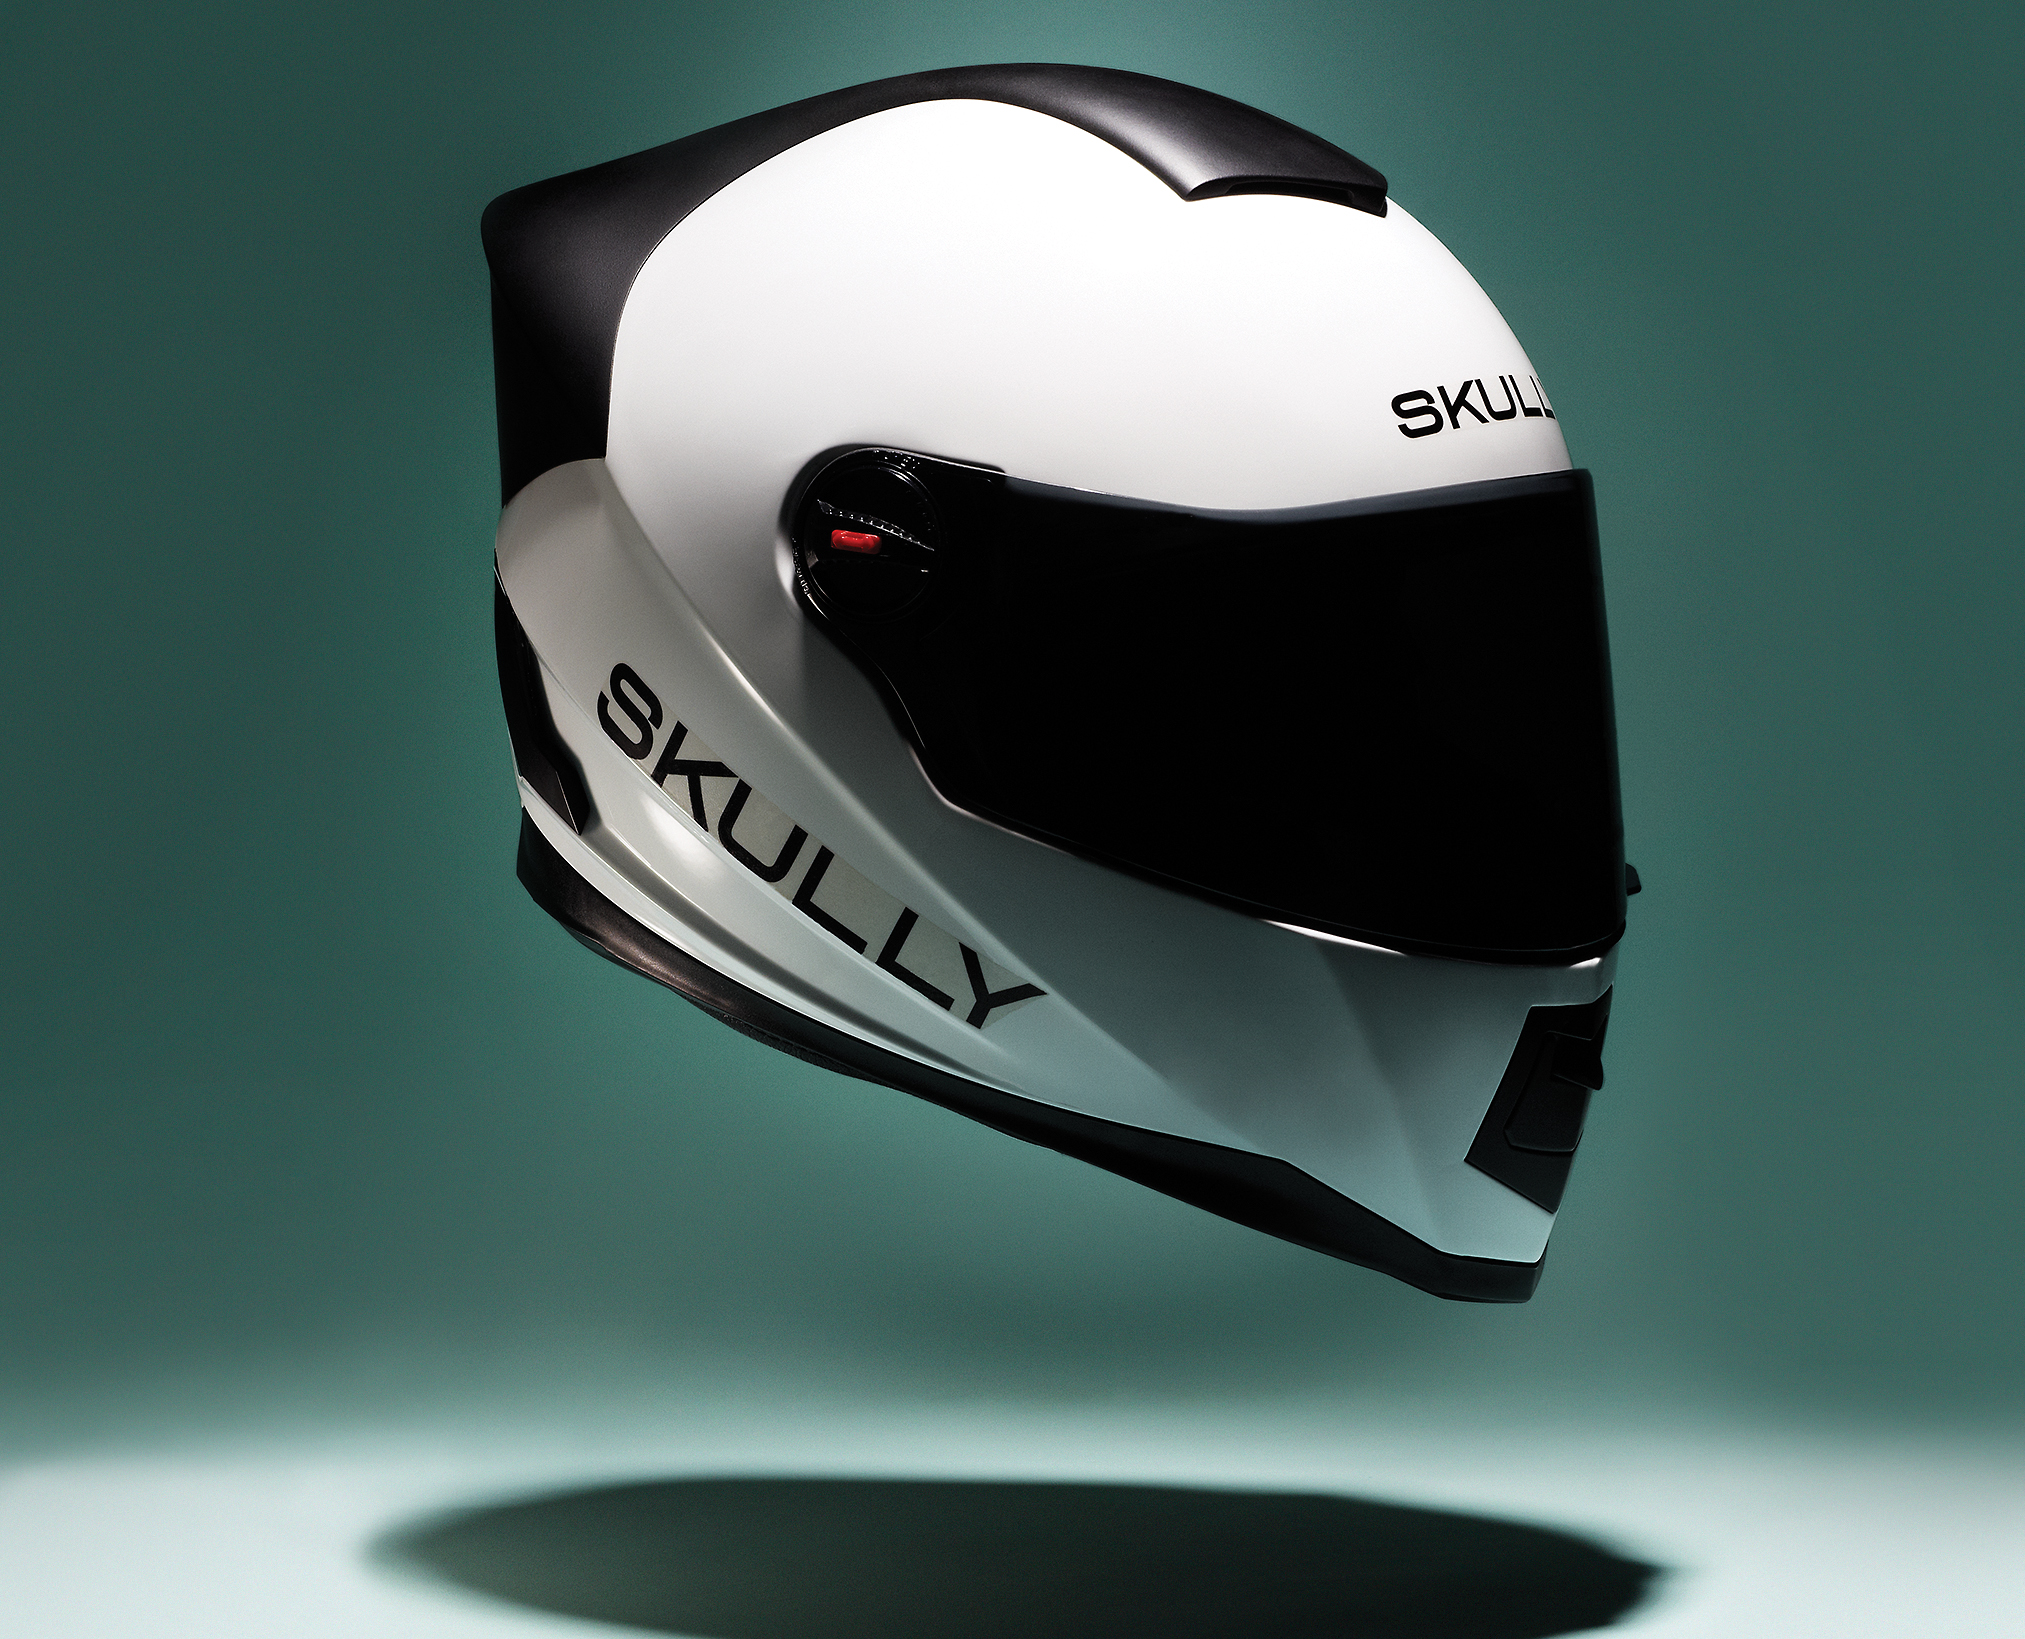 A Motorcycle Helmet For The Digital World